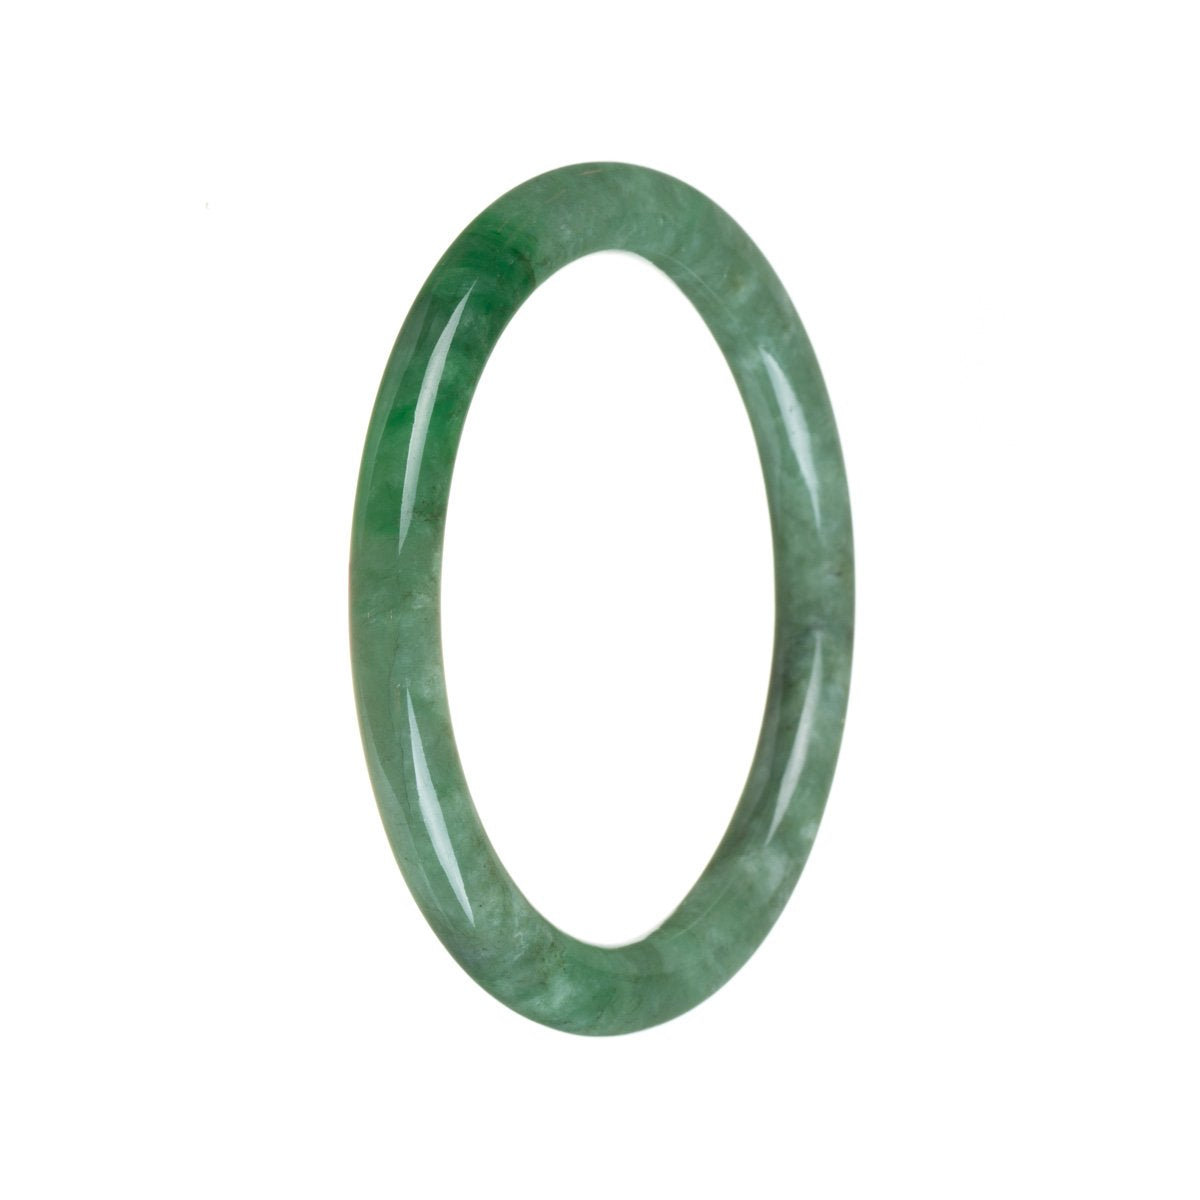 A small, round, green jade bangle with an authentic and traditional design.